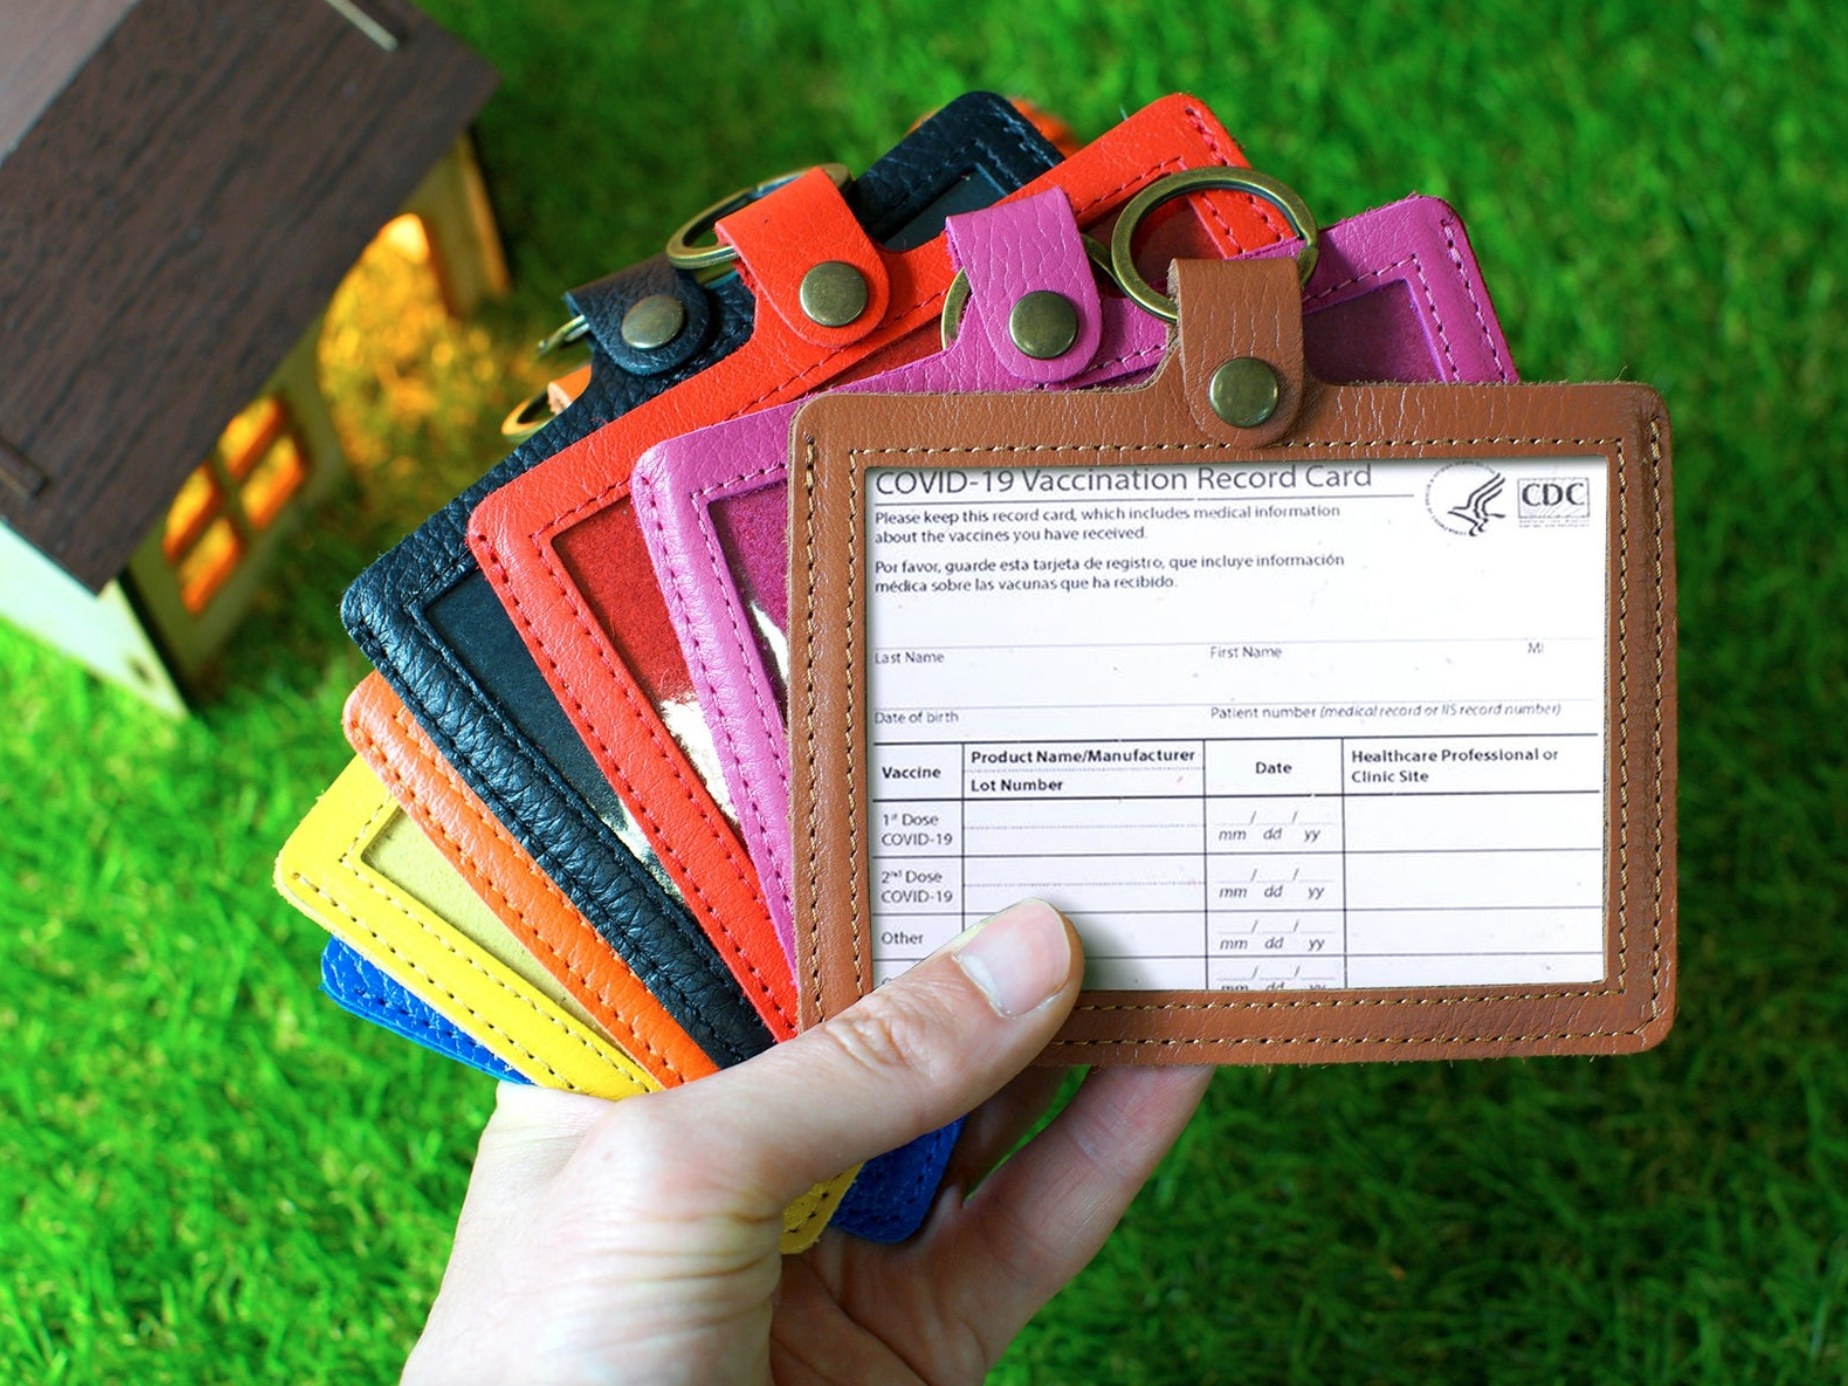 The leather vaccine card holder with key ring in different colors